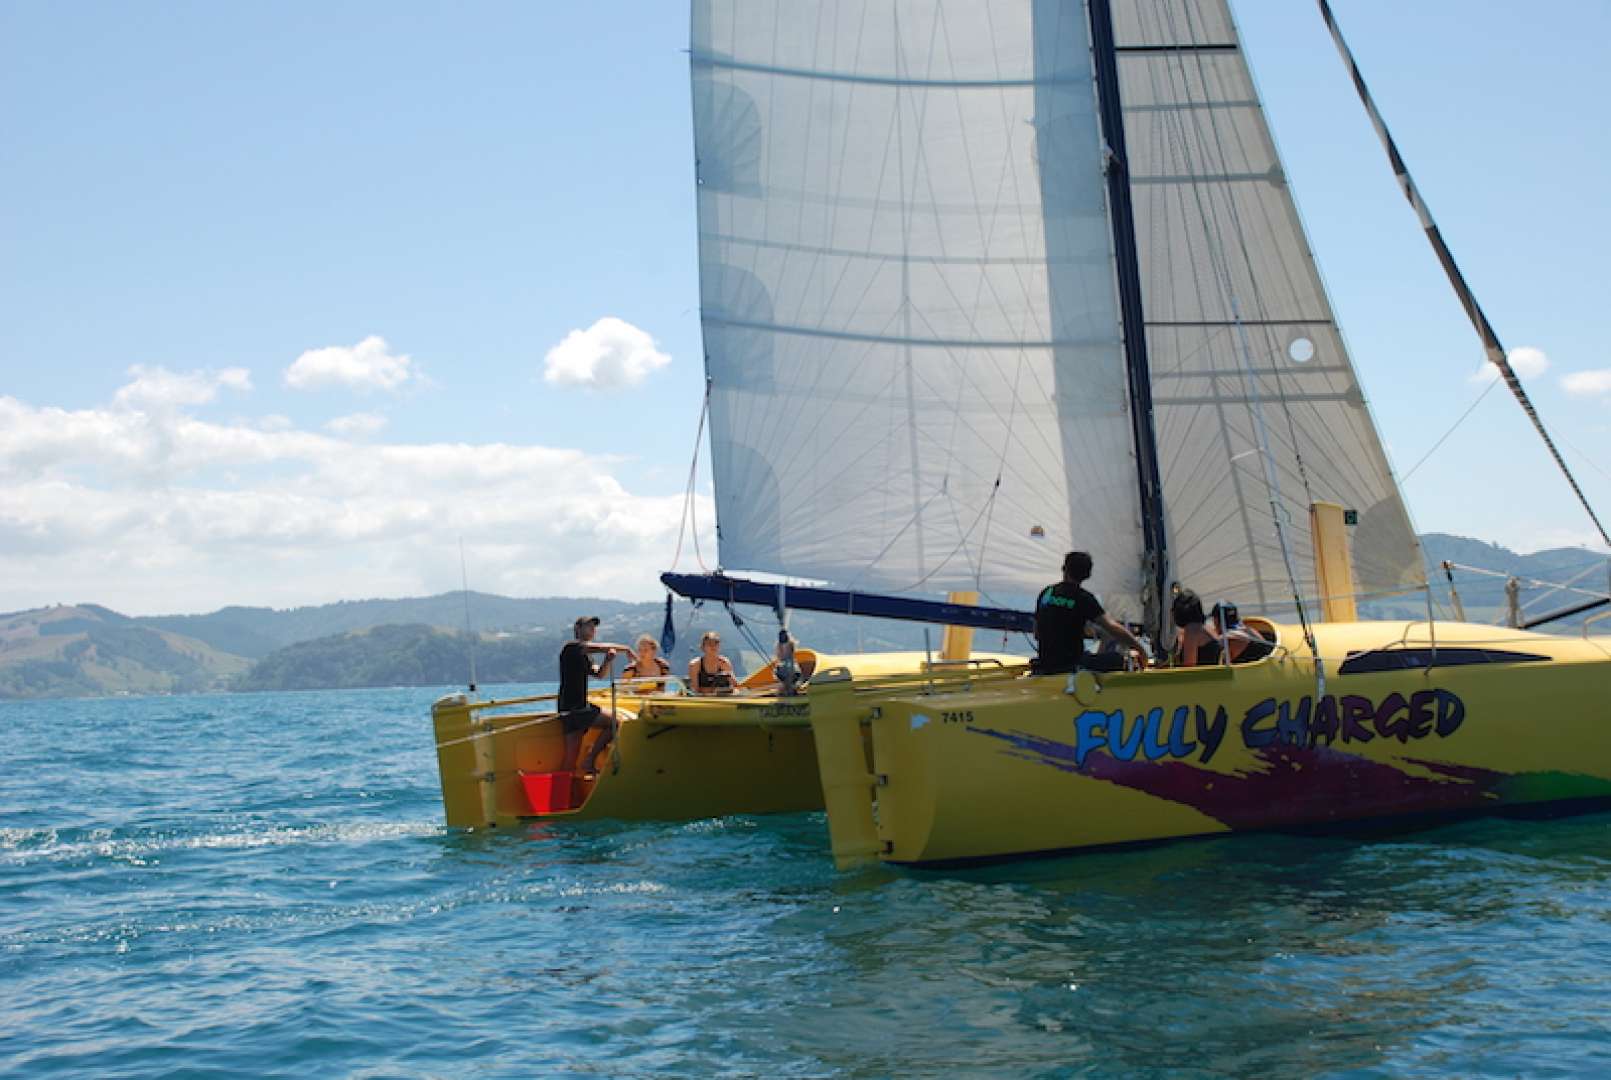 Our Spacious Catamaran is Wind-Powered Eco-Friendly